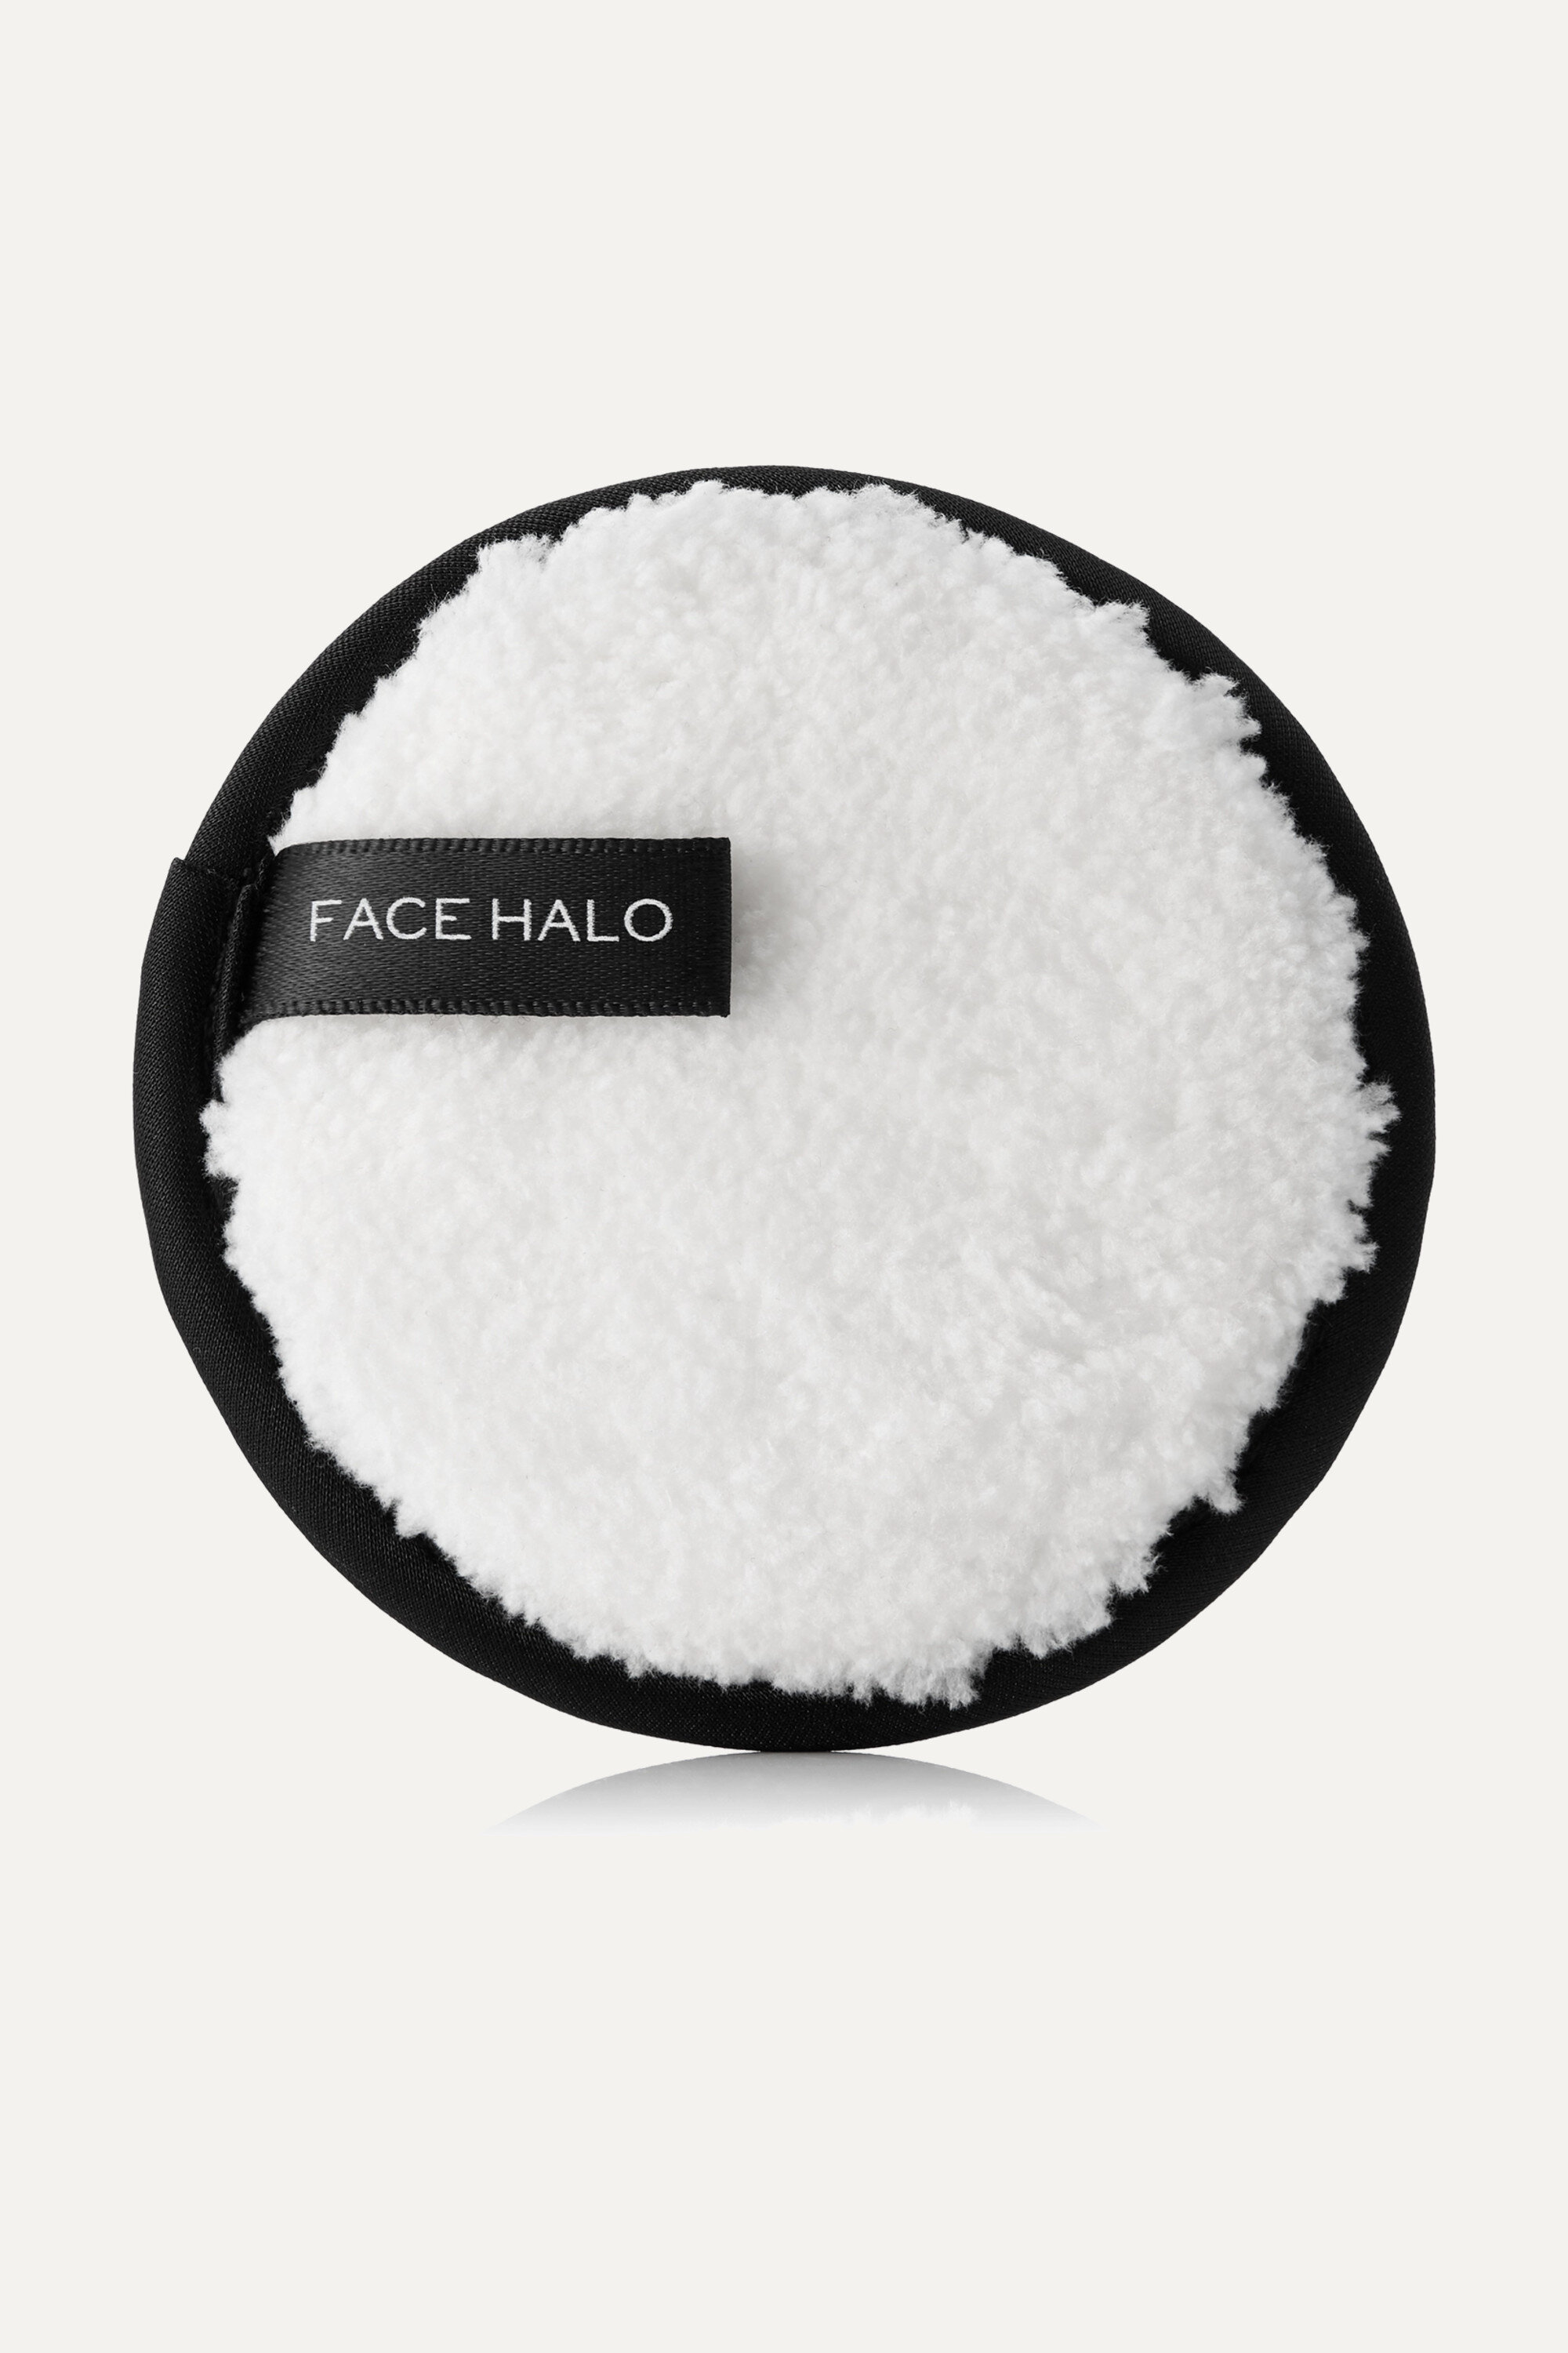 Face Halo Pads, £18